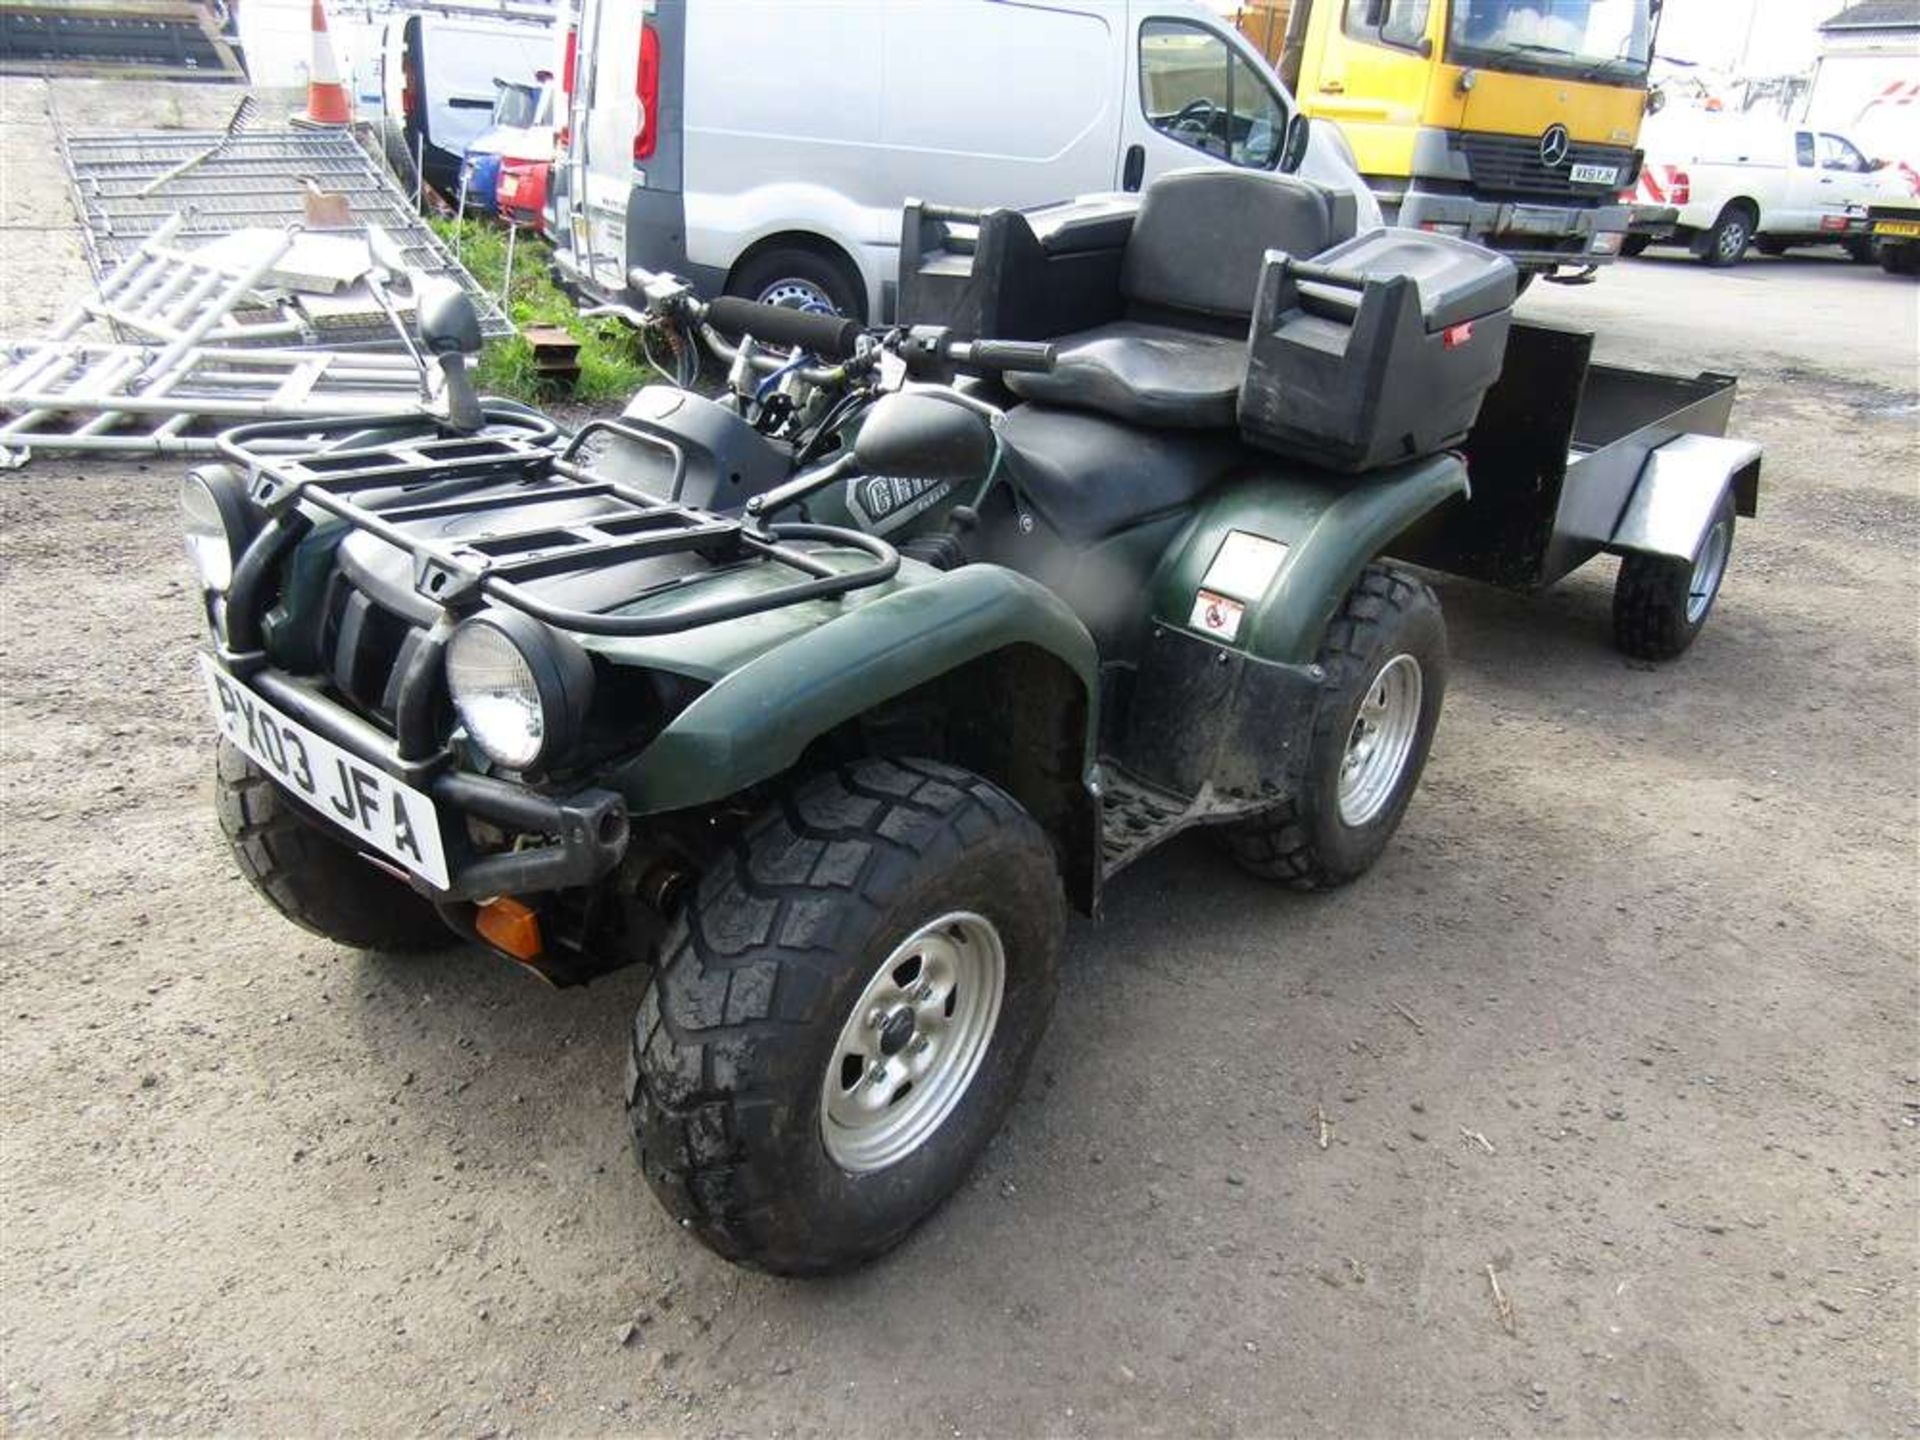 2003 03 reg Yamaha 660 Grizzy Quad c/w Trailer & Winch - Fully Road Legal PLG - Image 2 of 5